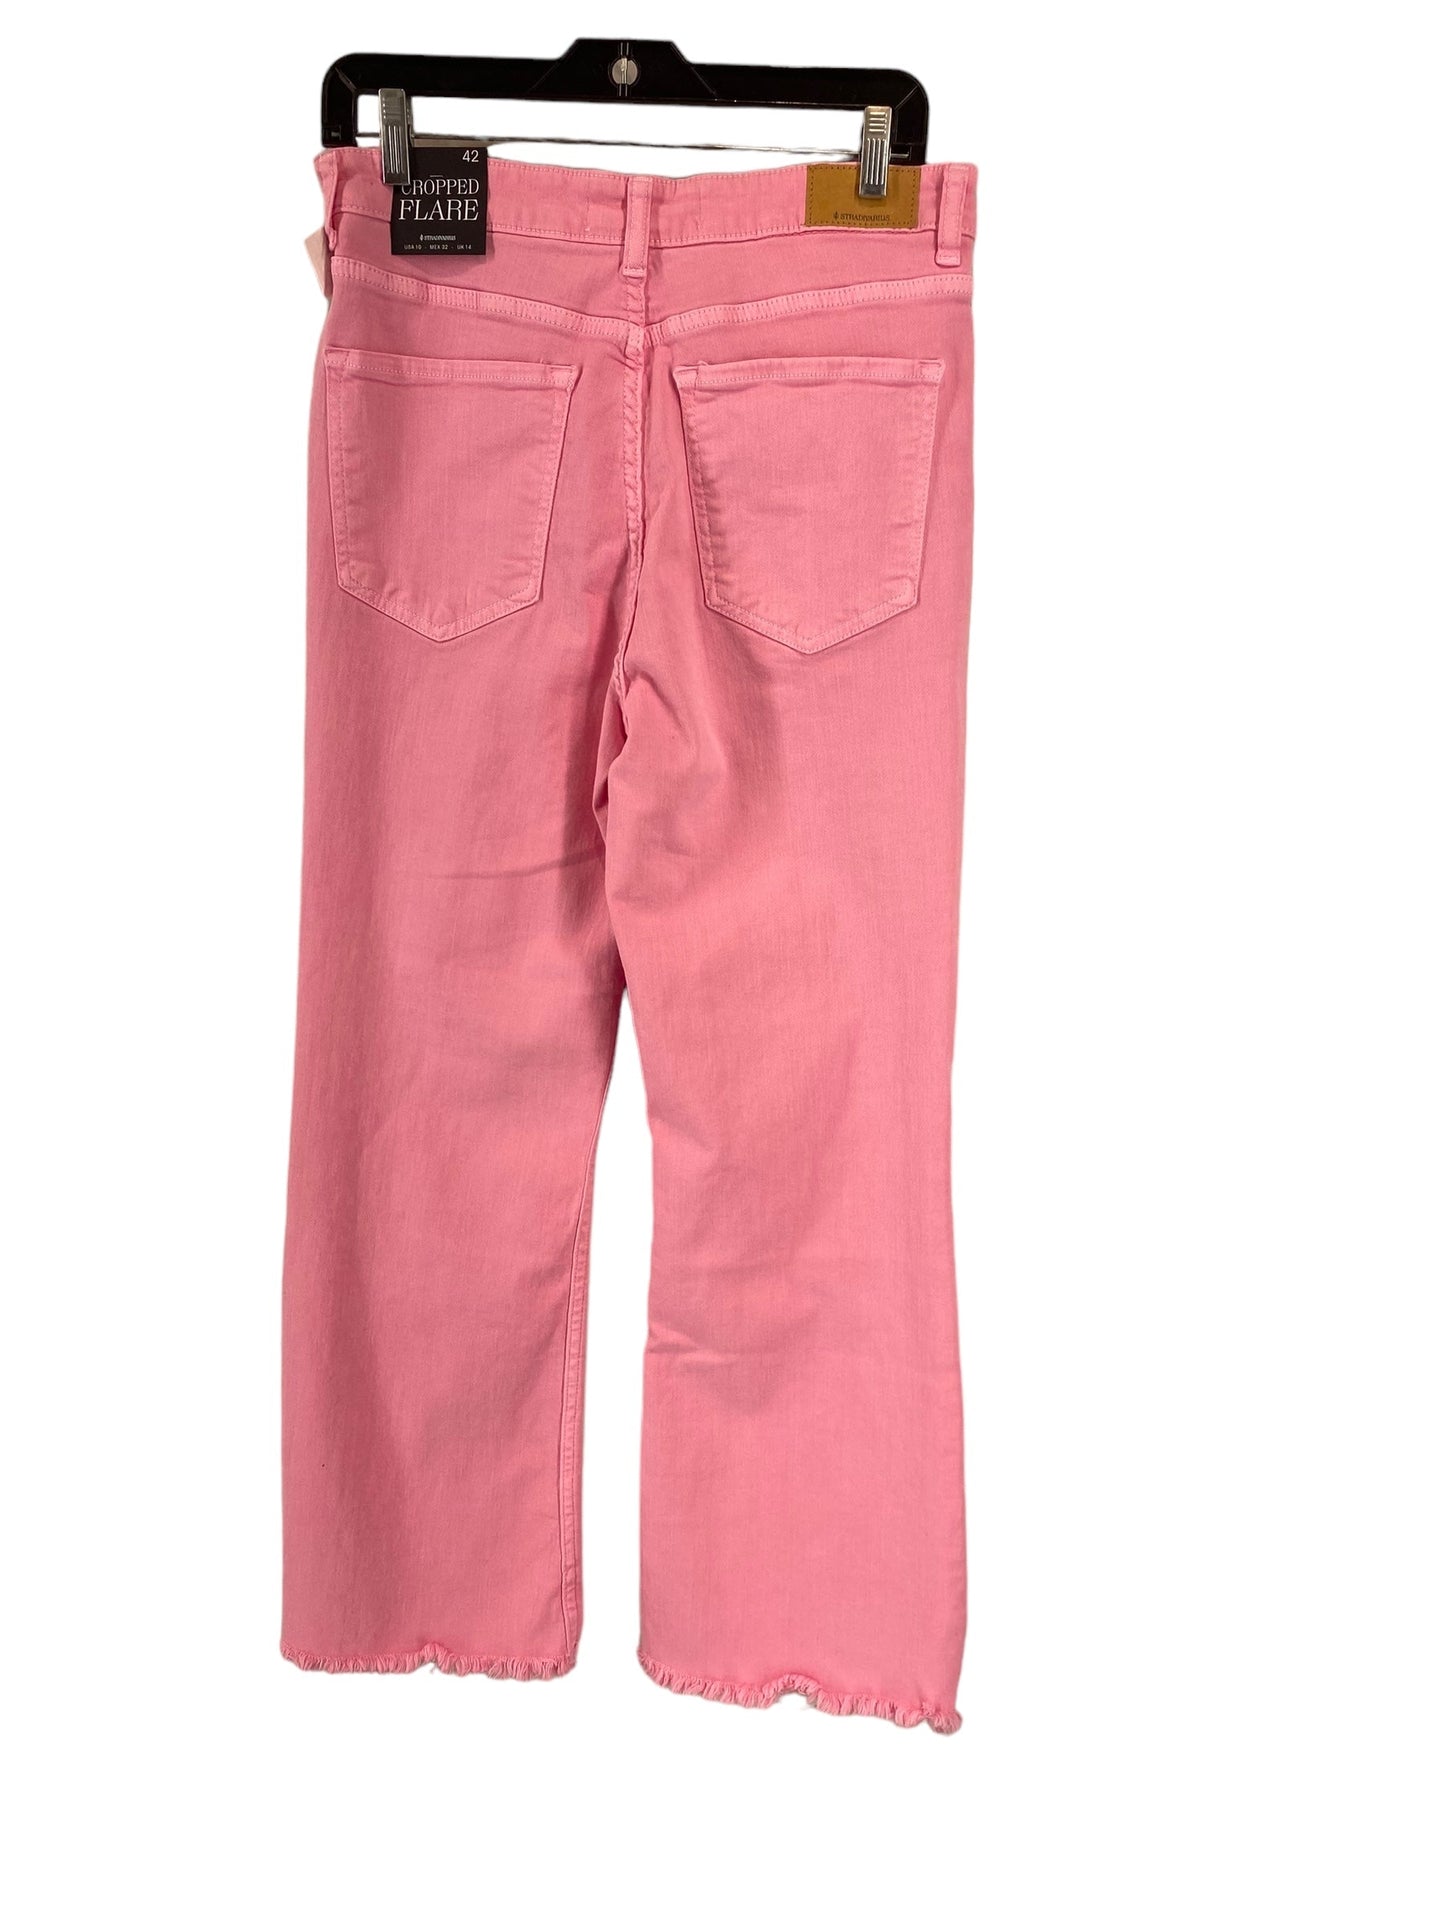 Pink Denim Jeans Cropped Clothes Mentor, Size 10